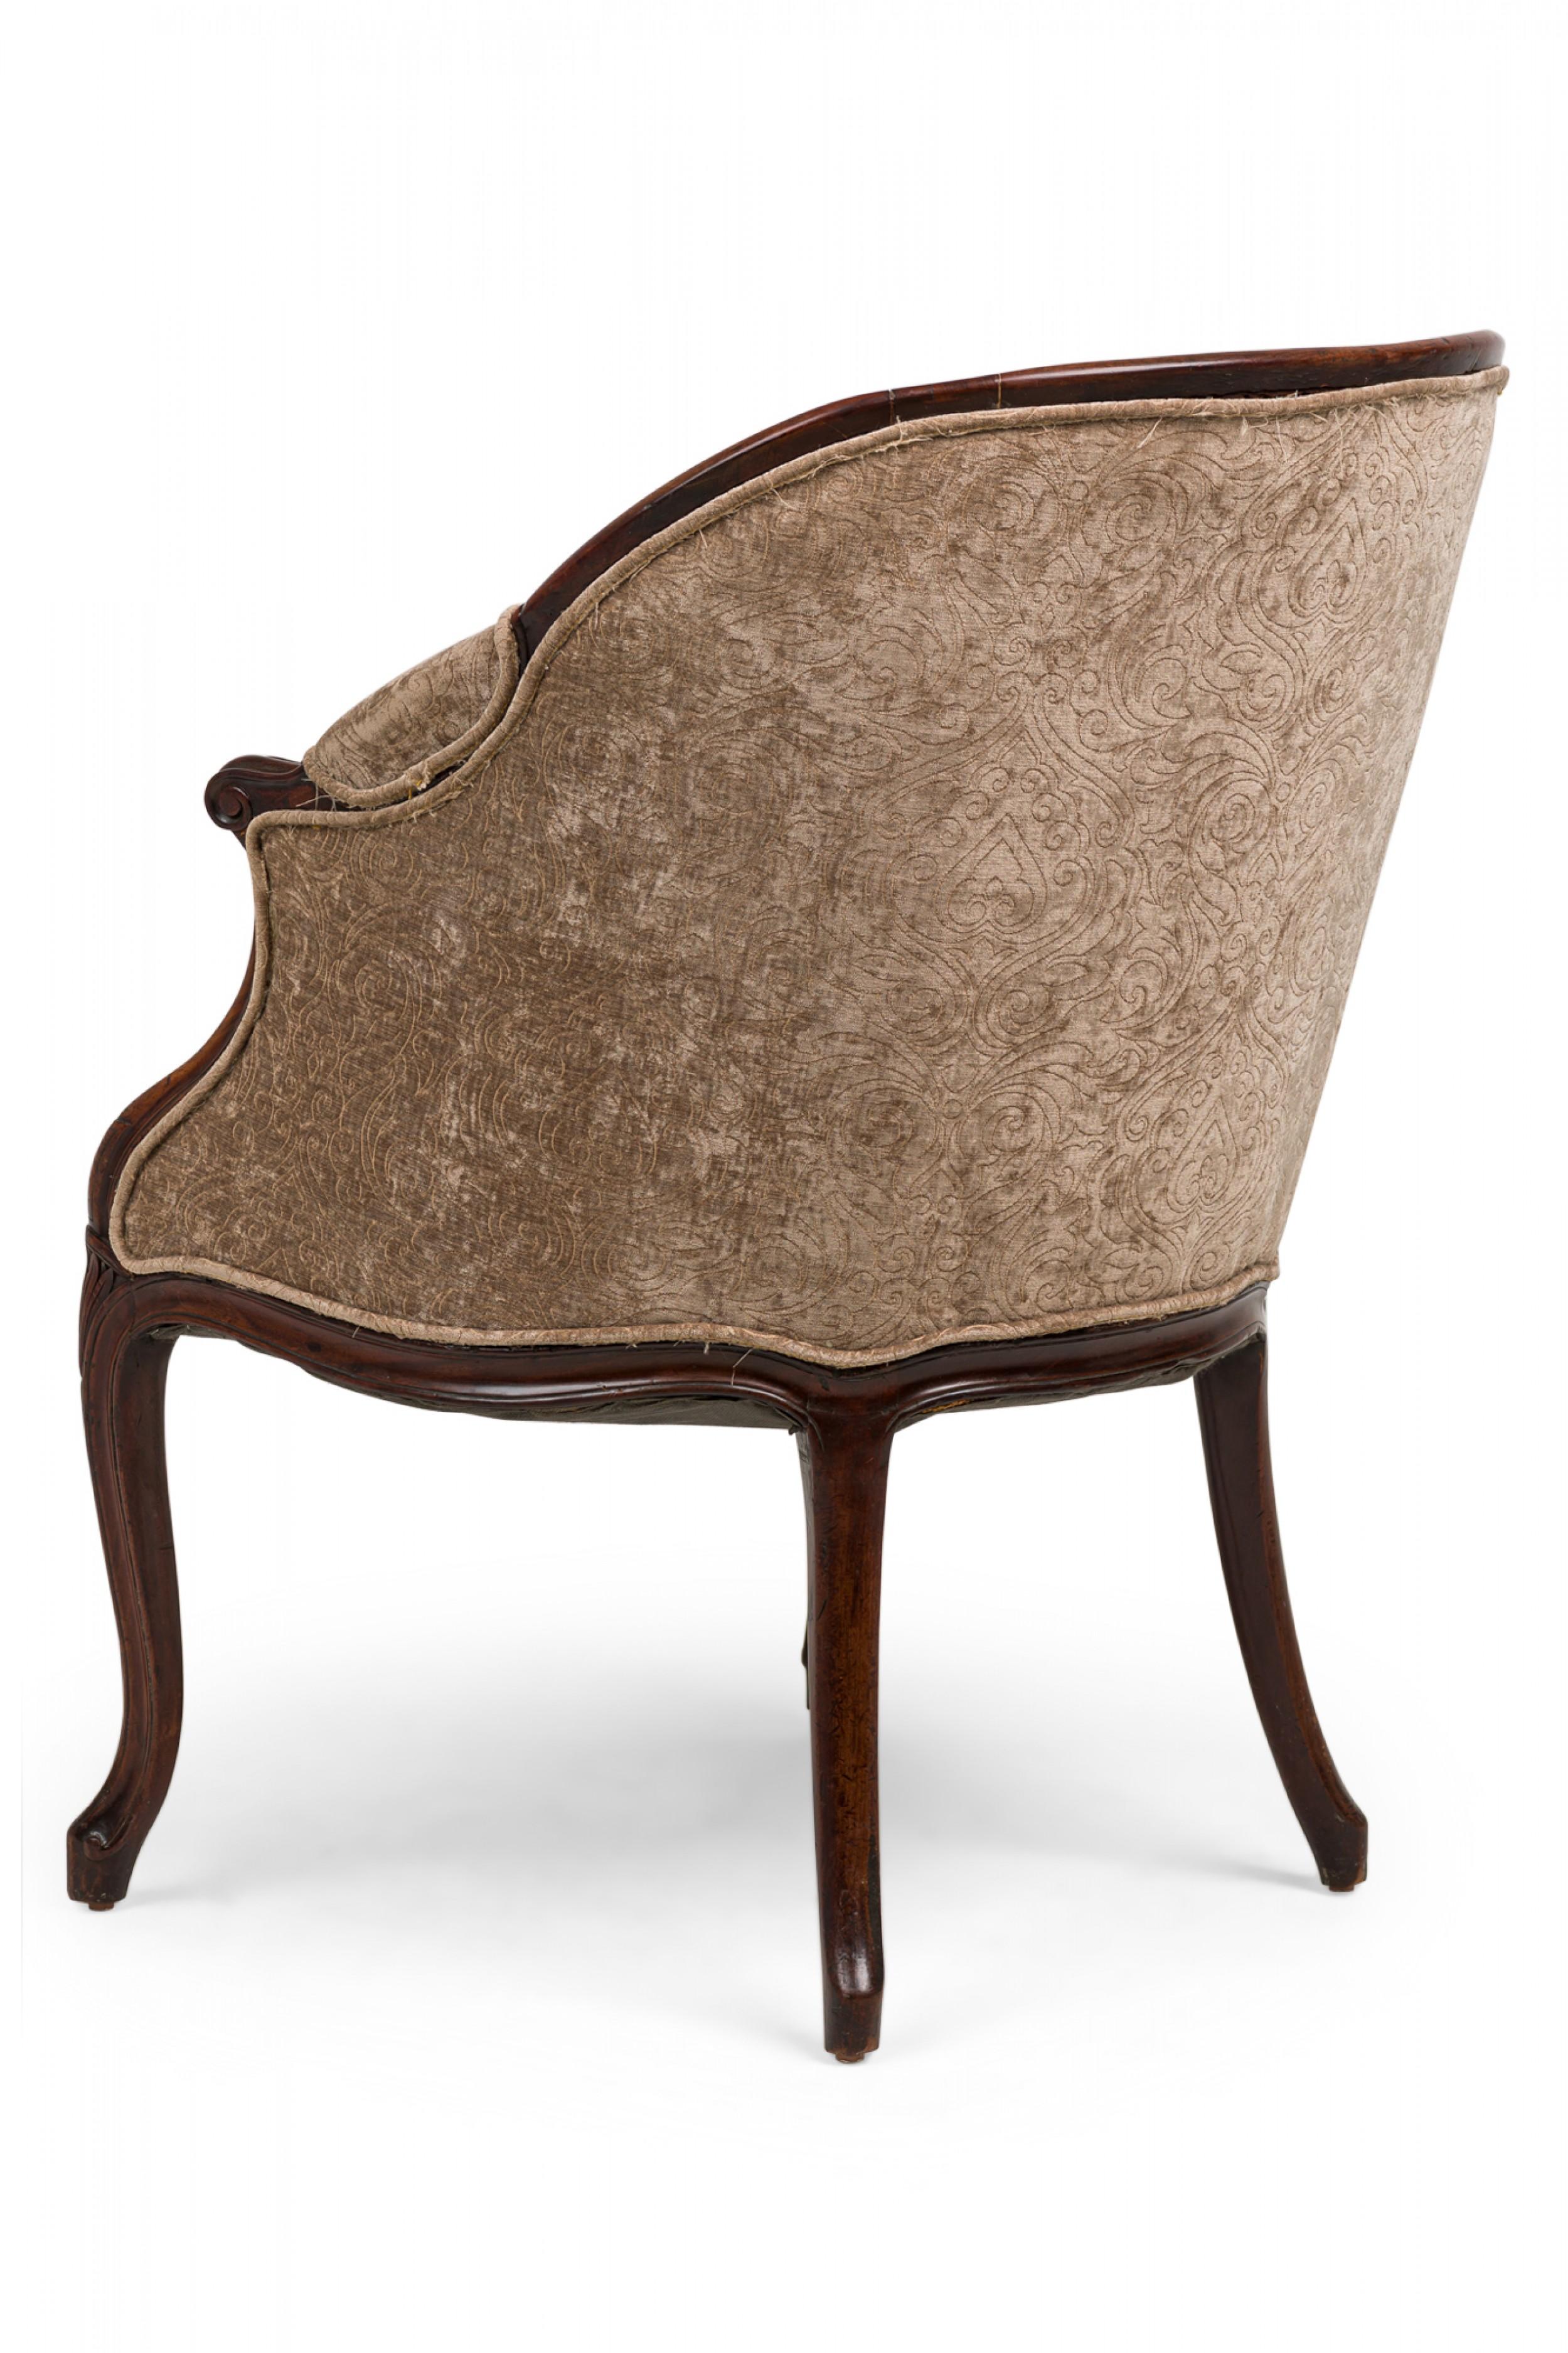 Early 19th Century English George III Upholstered Mahogany and Taupe Embroidered Velvet Armchair